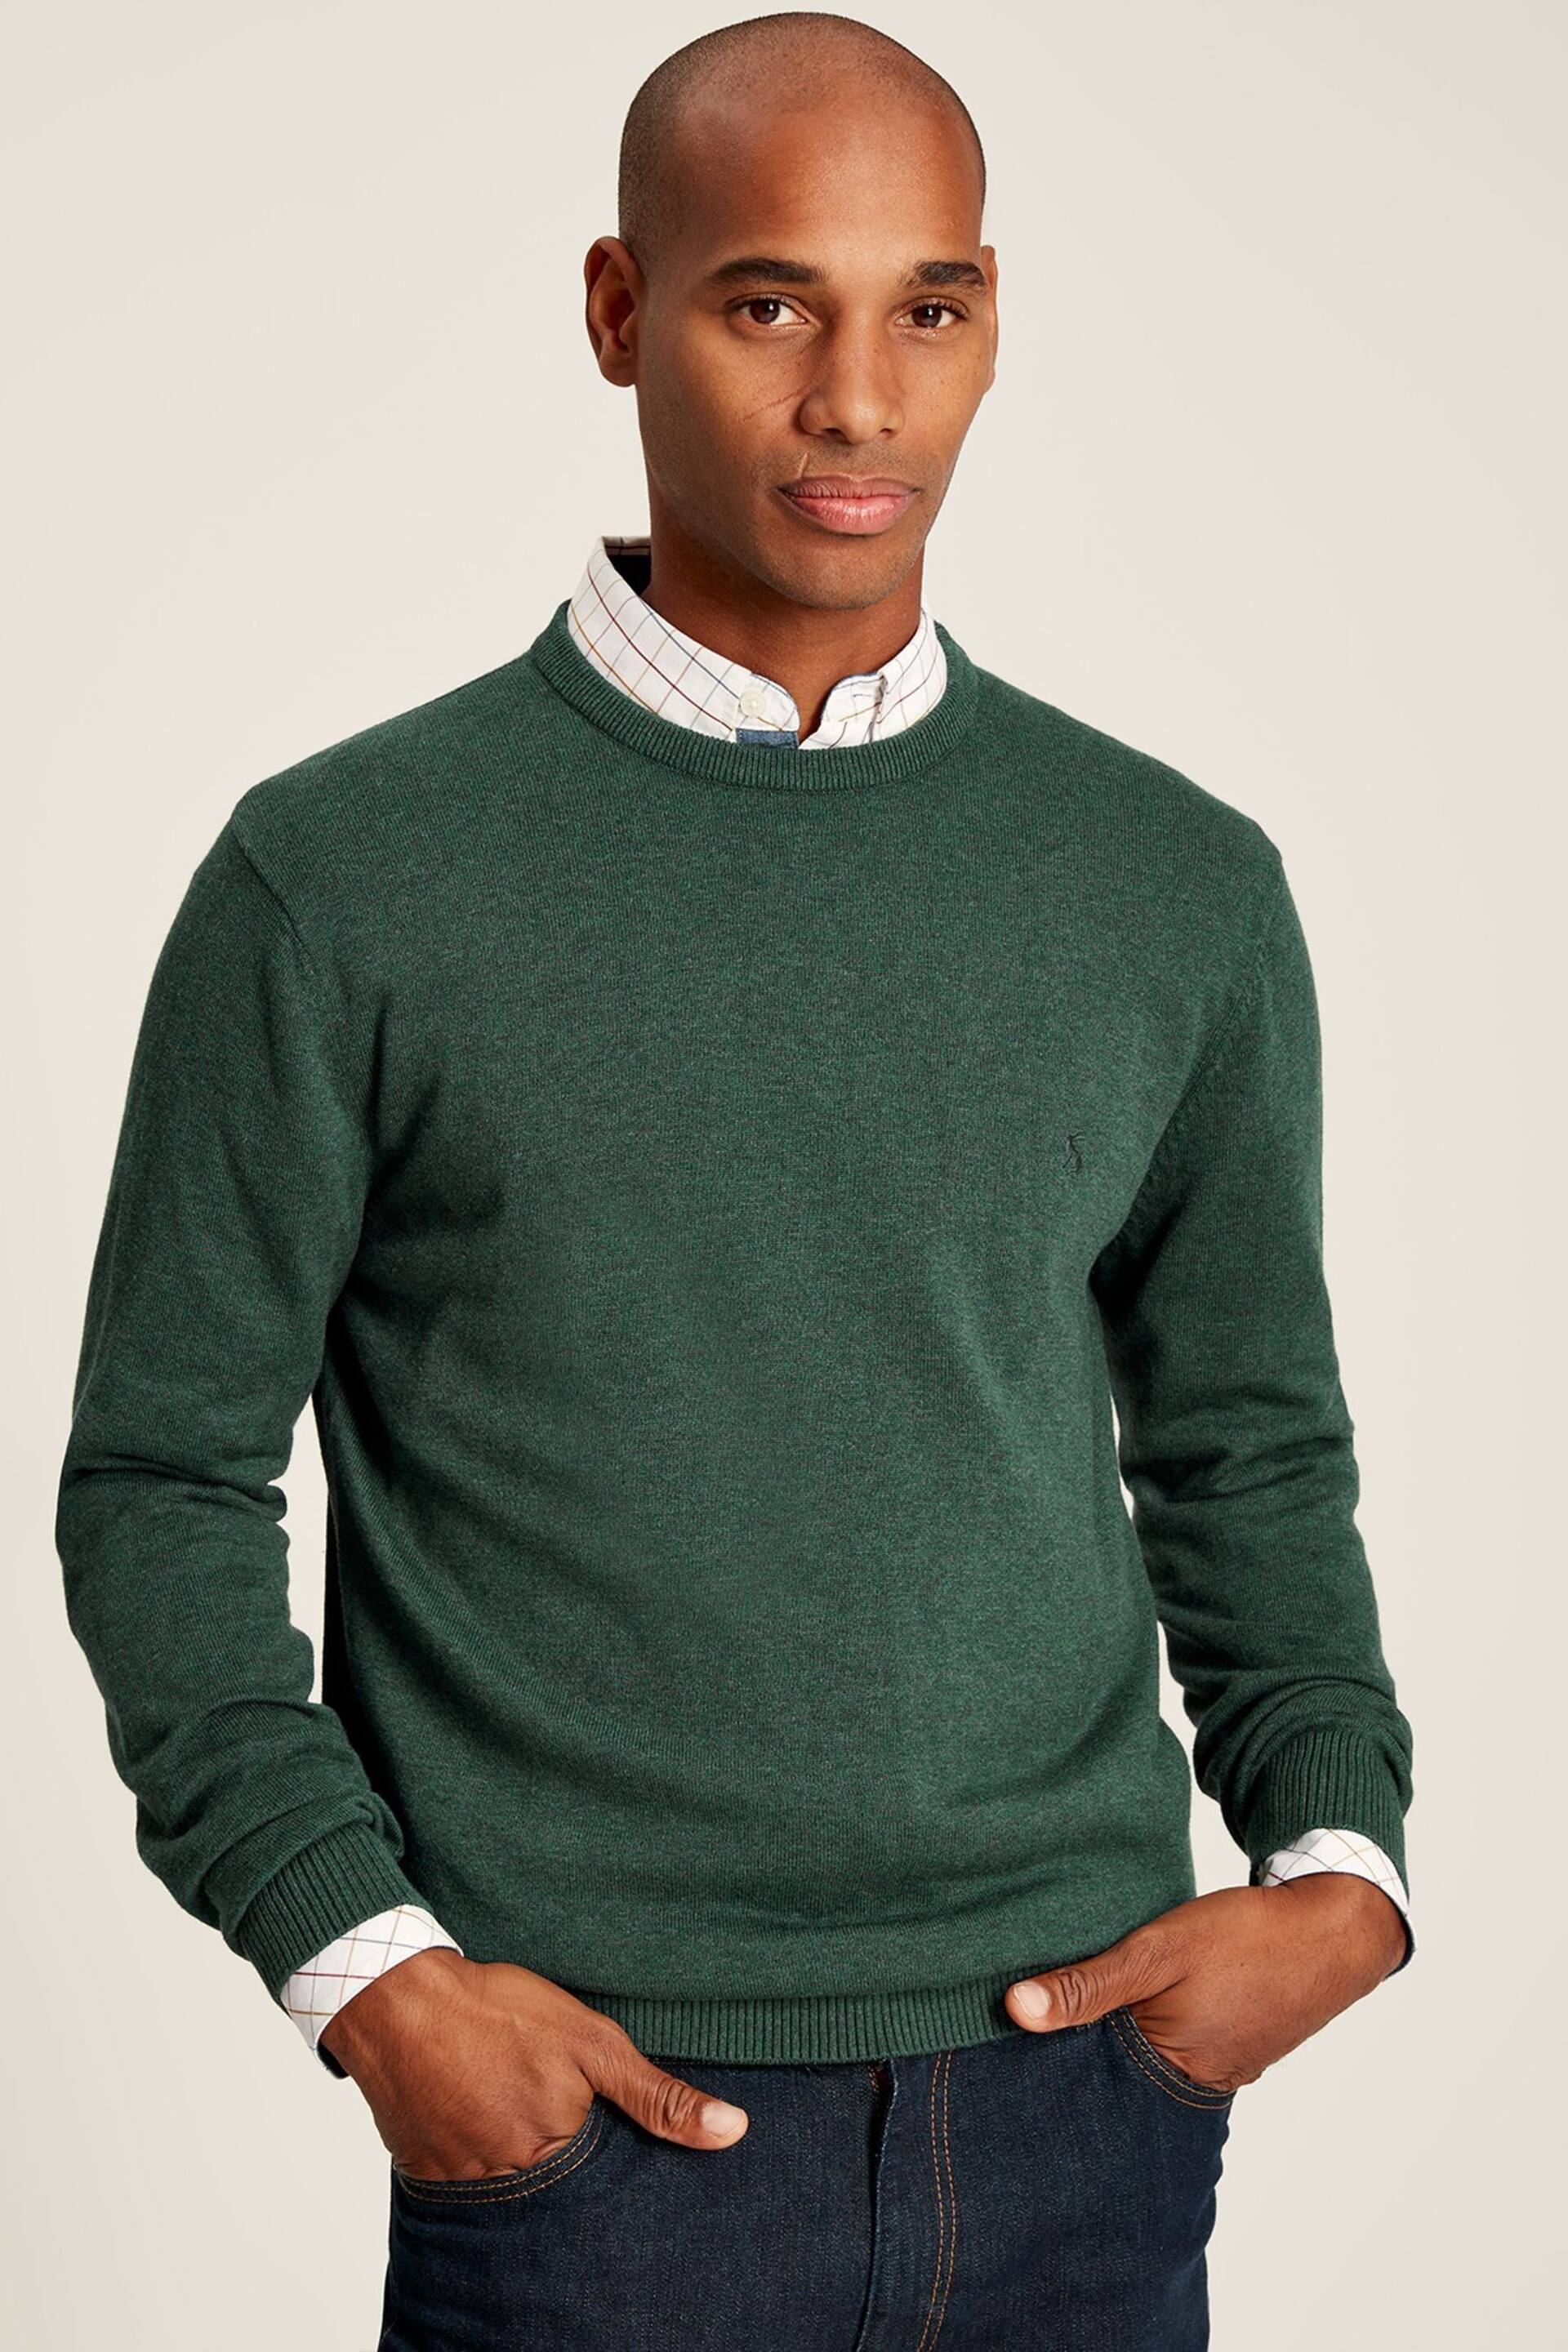 Joules Jarvis Green Cotton Crew Neck Jumper - Image 1 of 6